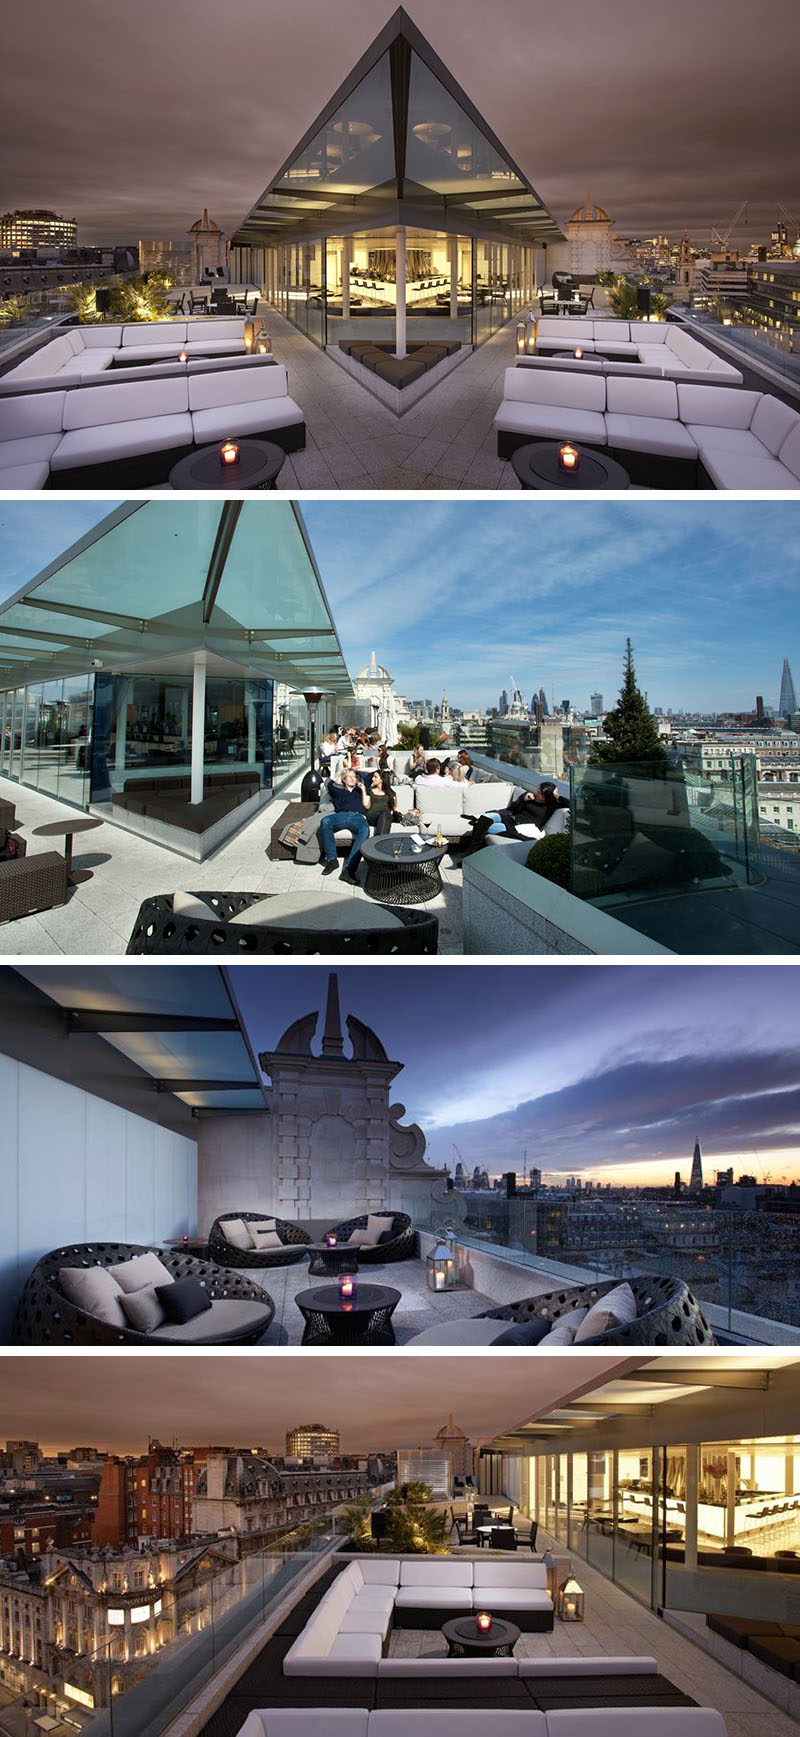 10 Incredible Hotel Rooftops From Around The World // 4. From Radio Rooftop Bar of ME London hotel you get incredible views of all the main attractions, including Trafalgar Square, Tower Bridge, and St. Paul's Cathedral.